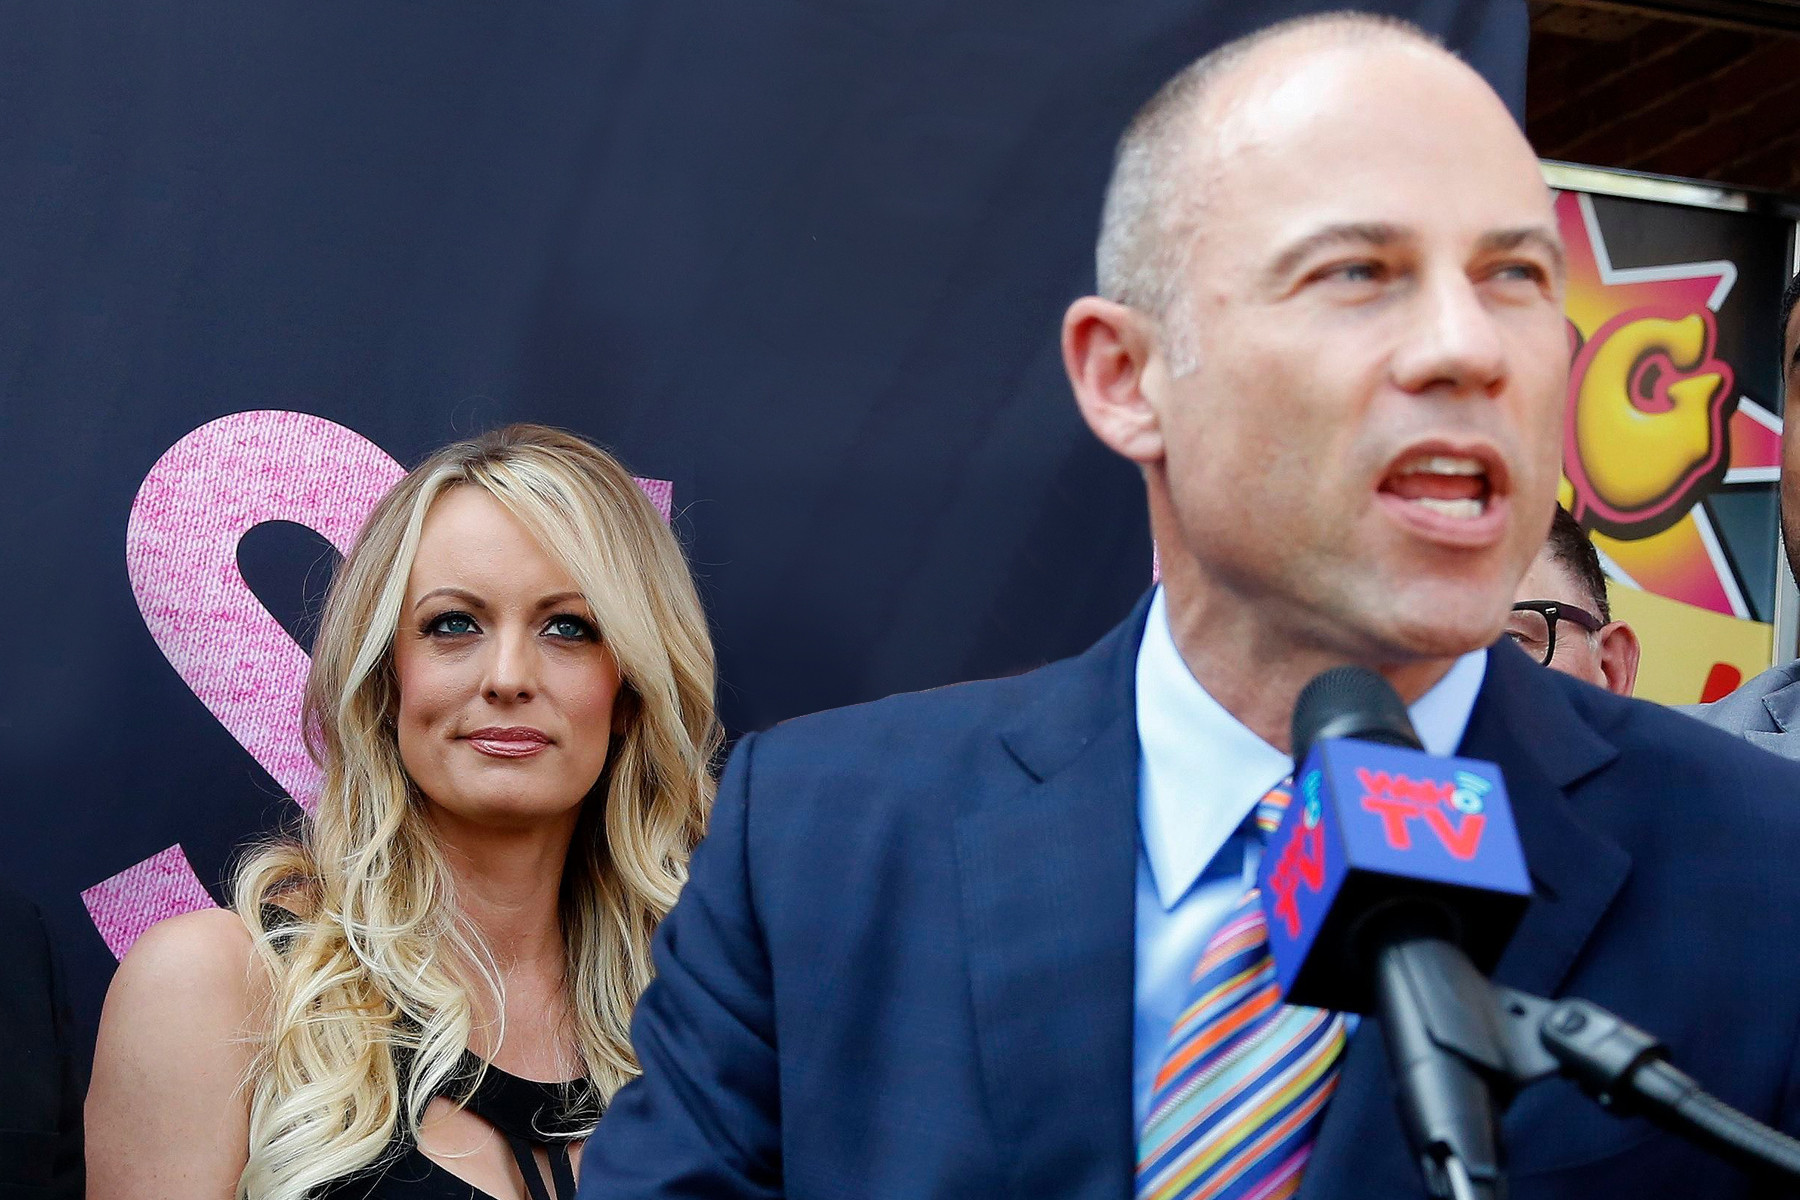 Michael Avenatti Indicted For Stealing Stormy Daniels' Book Advance1800 x 1200